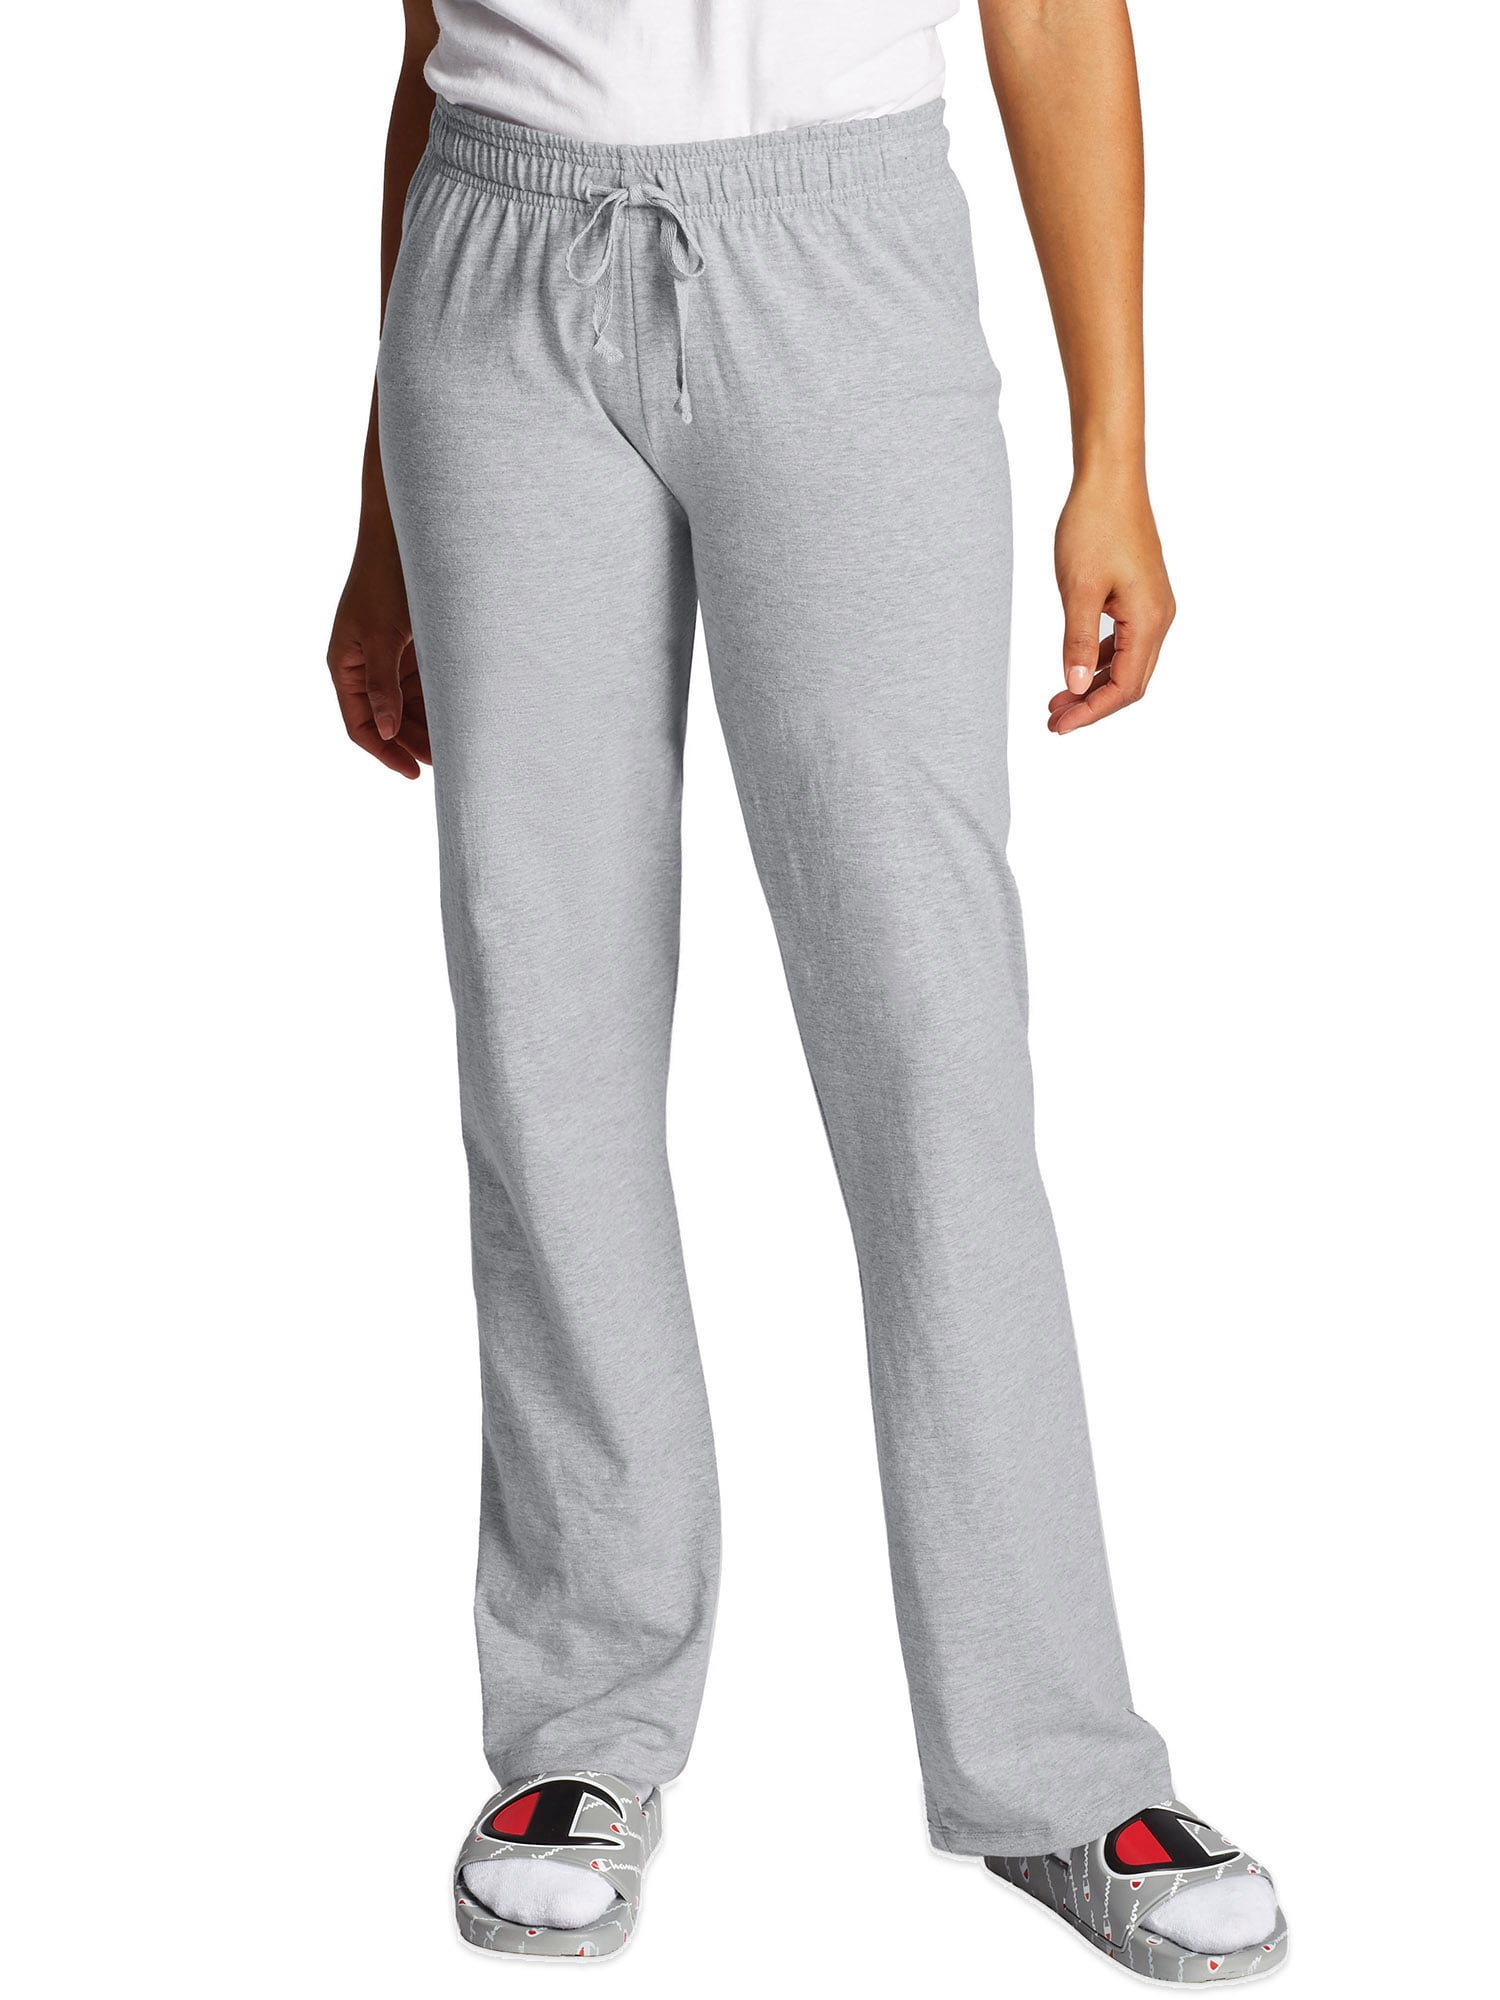 Hanes M7421 Authentic Womens Jersey Pants Size - Extra Large - Oxford Grey